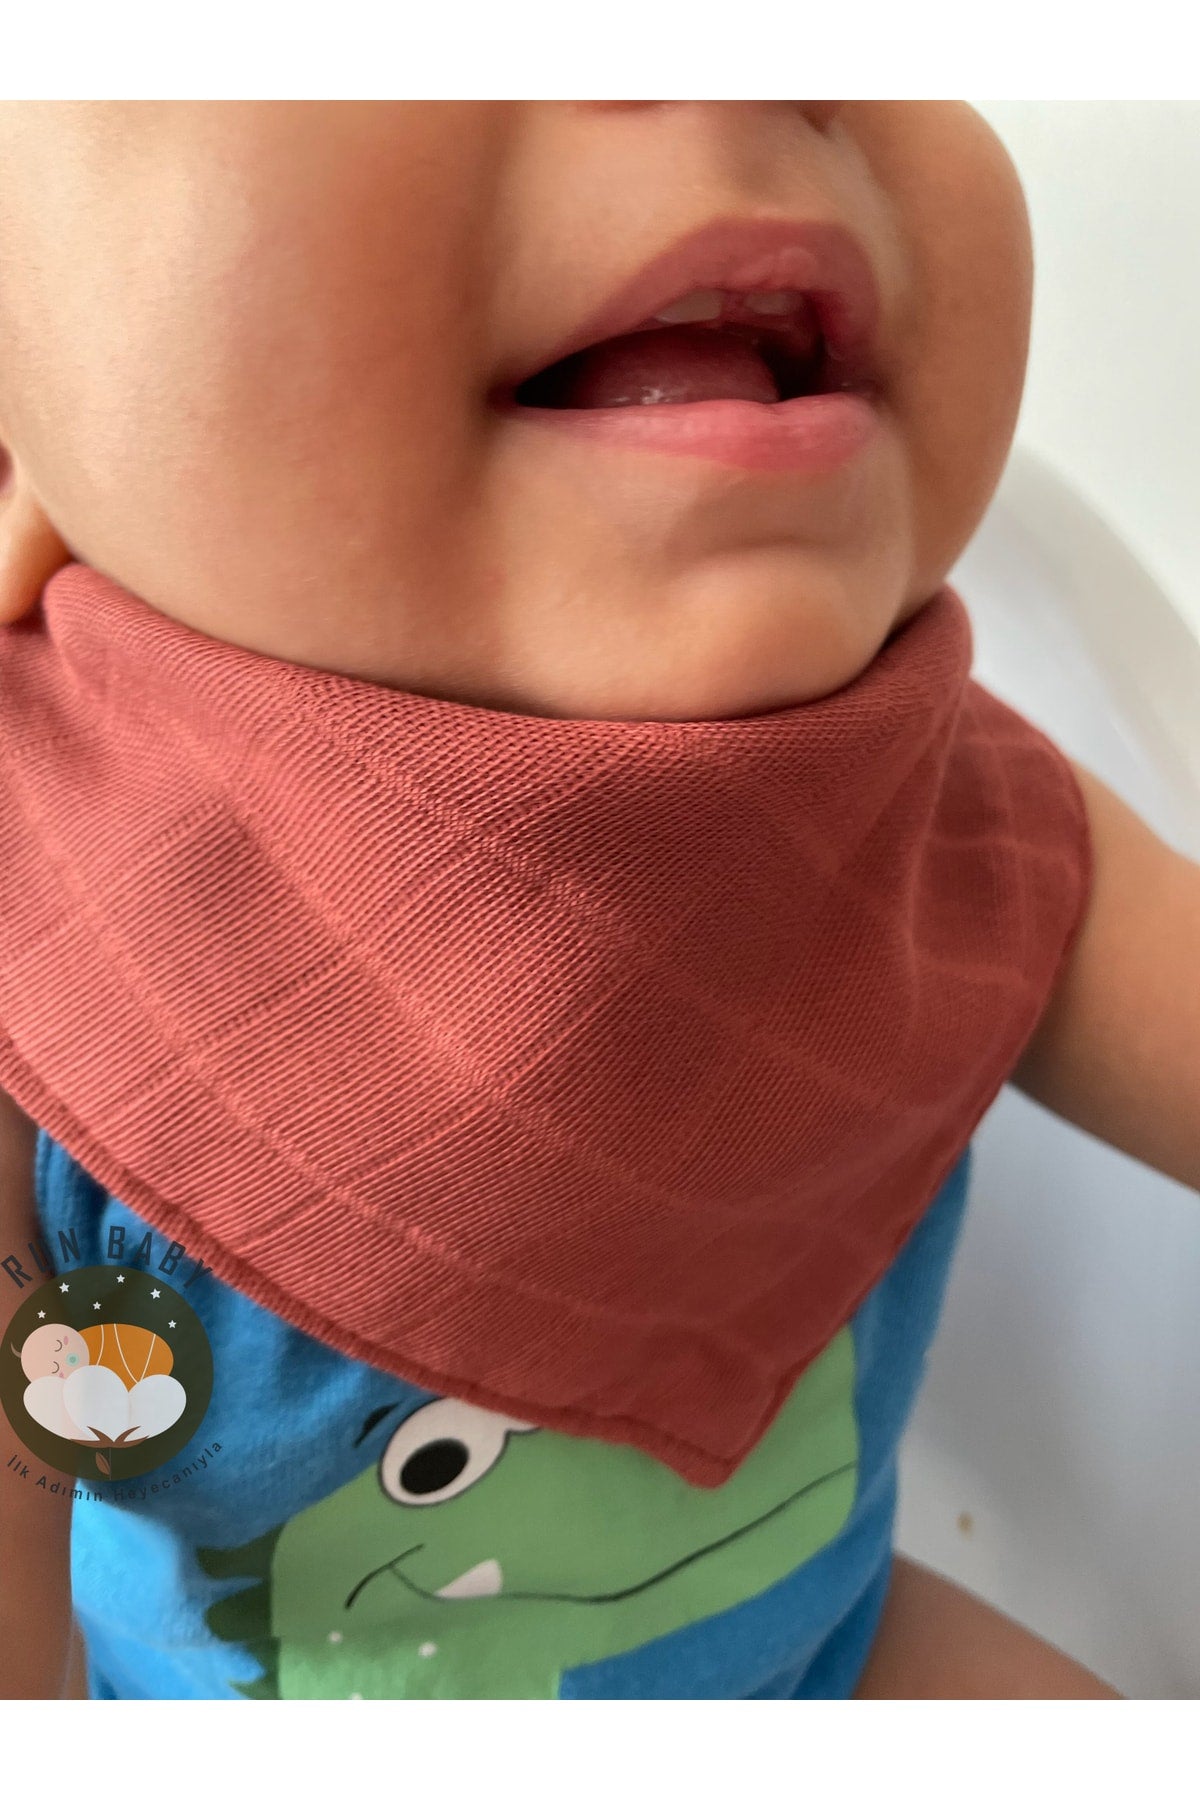 (12 PCS) Run Baby 100% Organic Cotton Double Layer Muslin Fabric With Two Snaps Baby Drooling Bib & Scarf